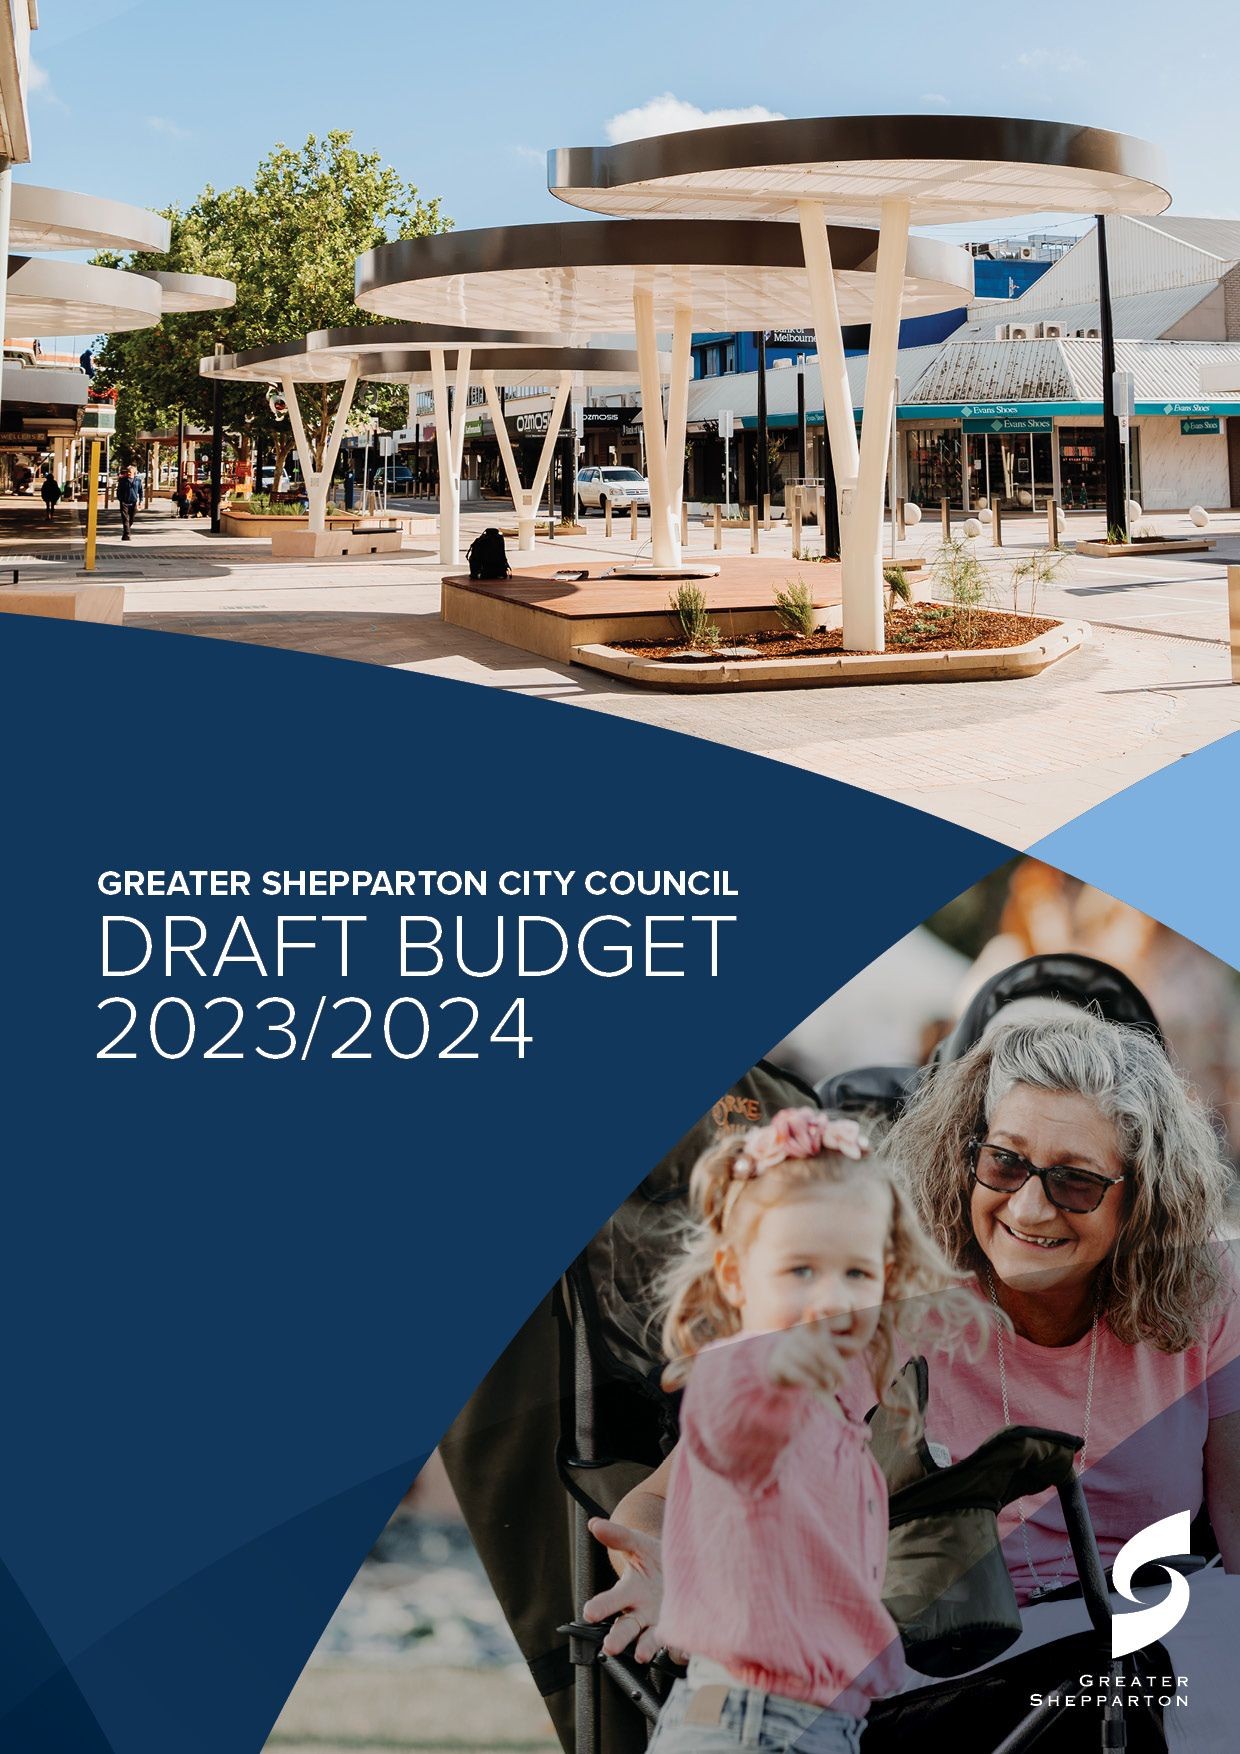 Last chance to provide your feedback on the 2023/2024 Draft Budget